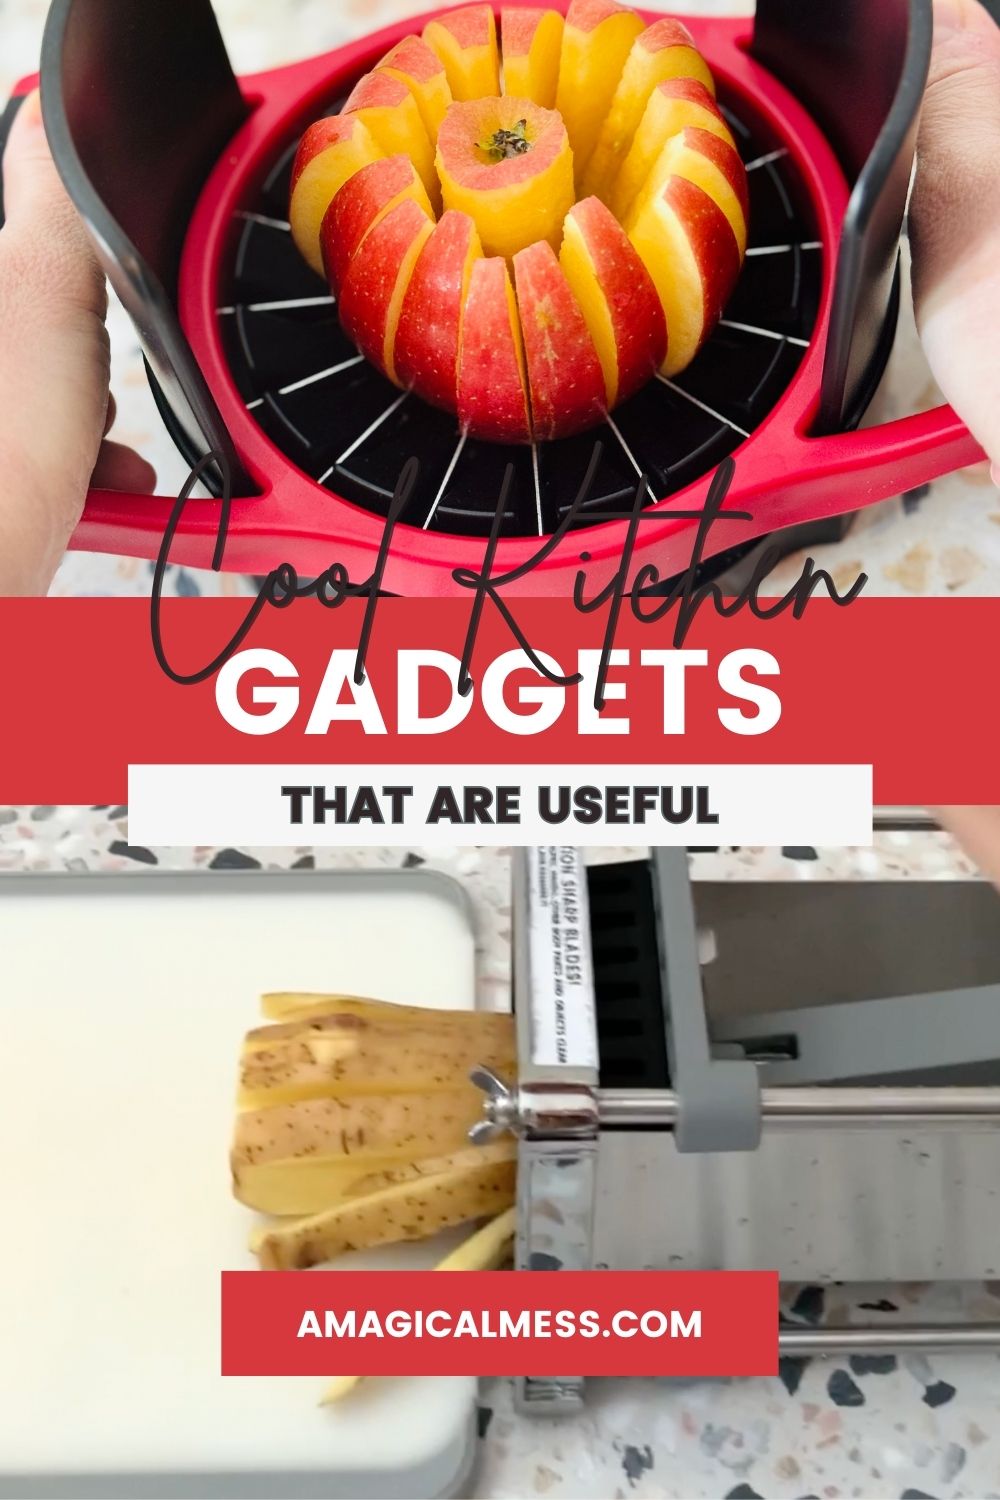 Cutting and apple with an apple slicer and using a fry cutter.